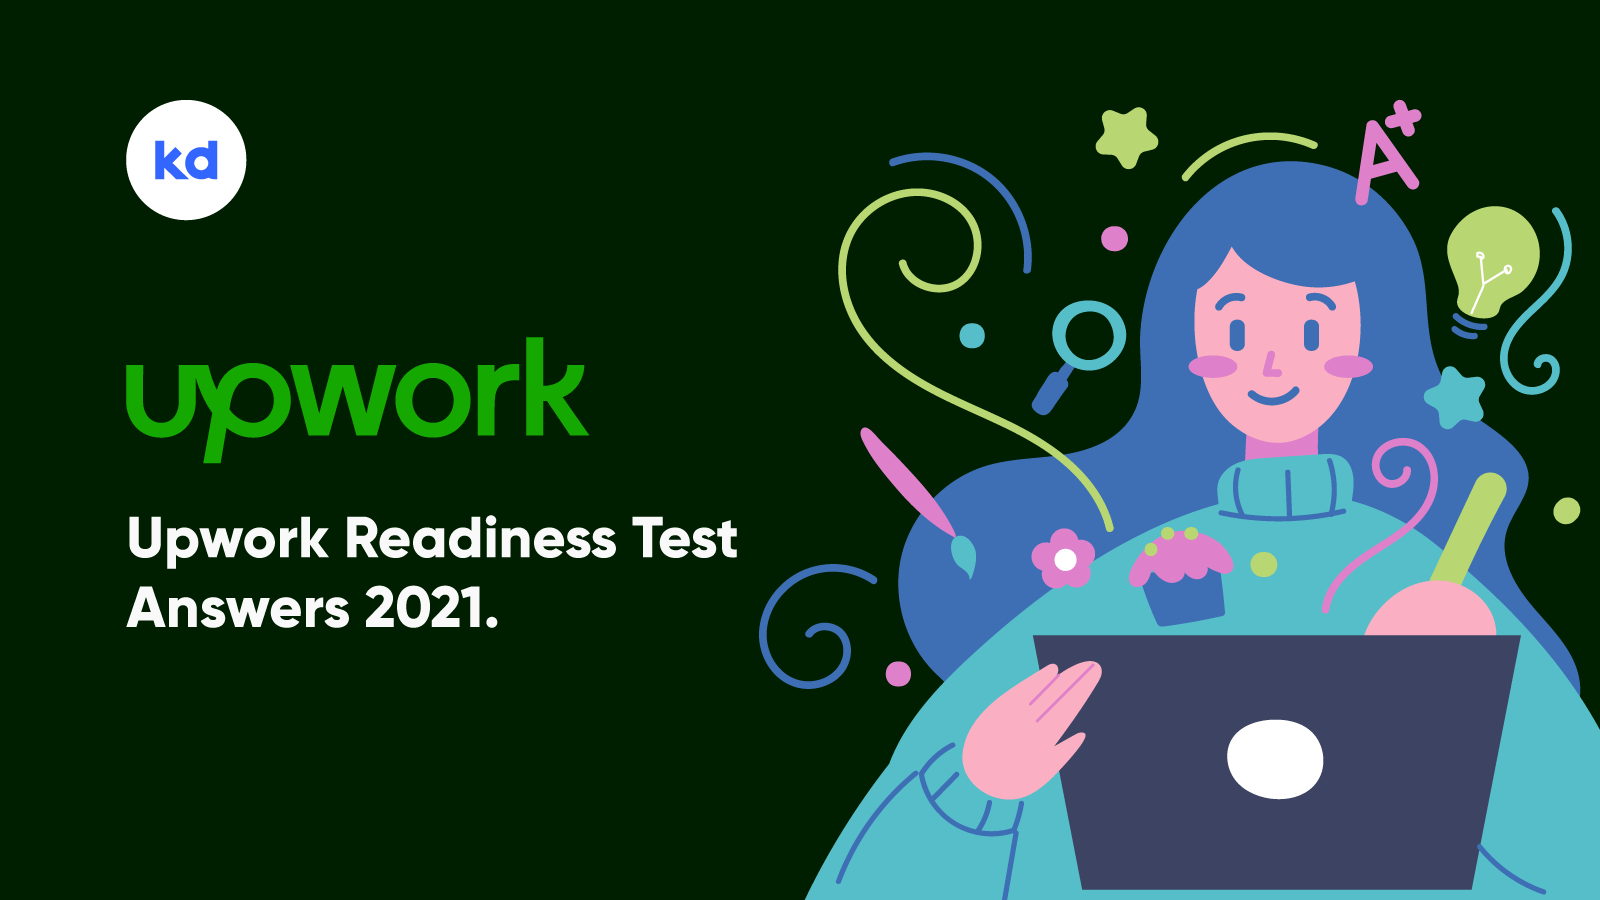 Upwork Readiness Test answers 2021